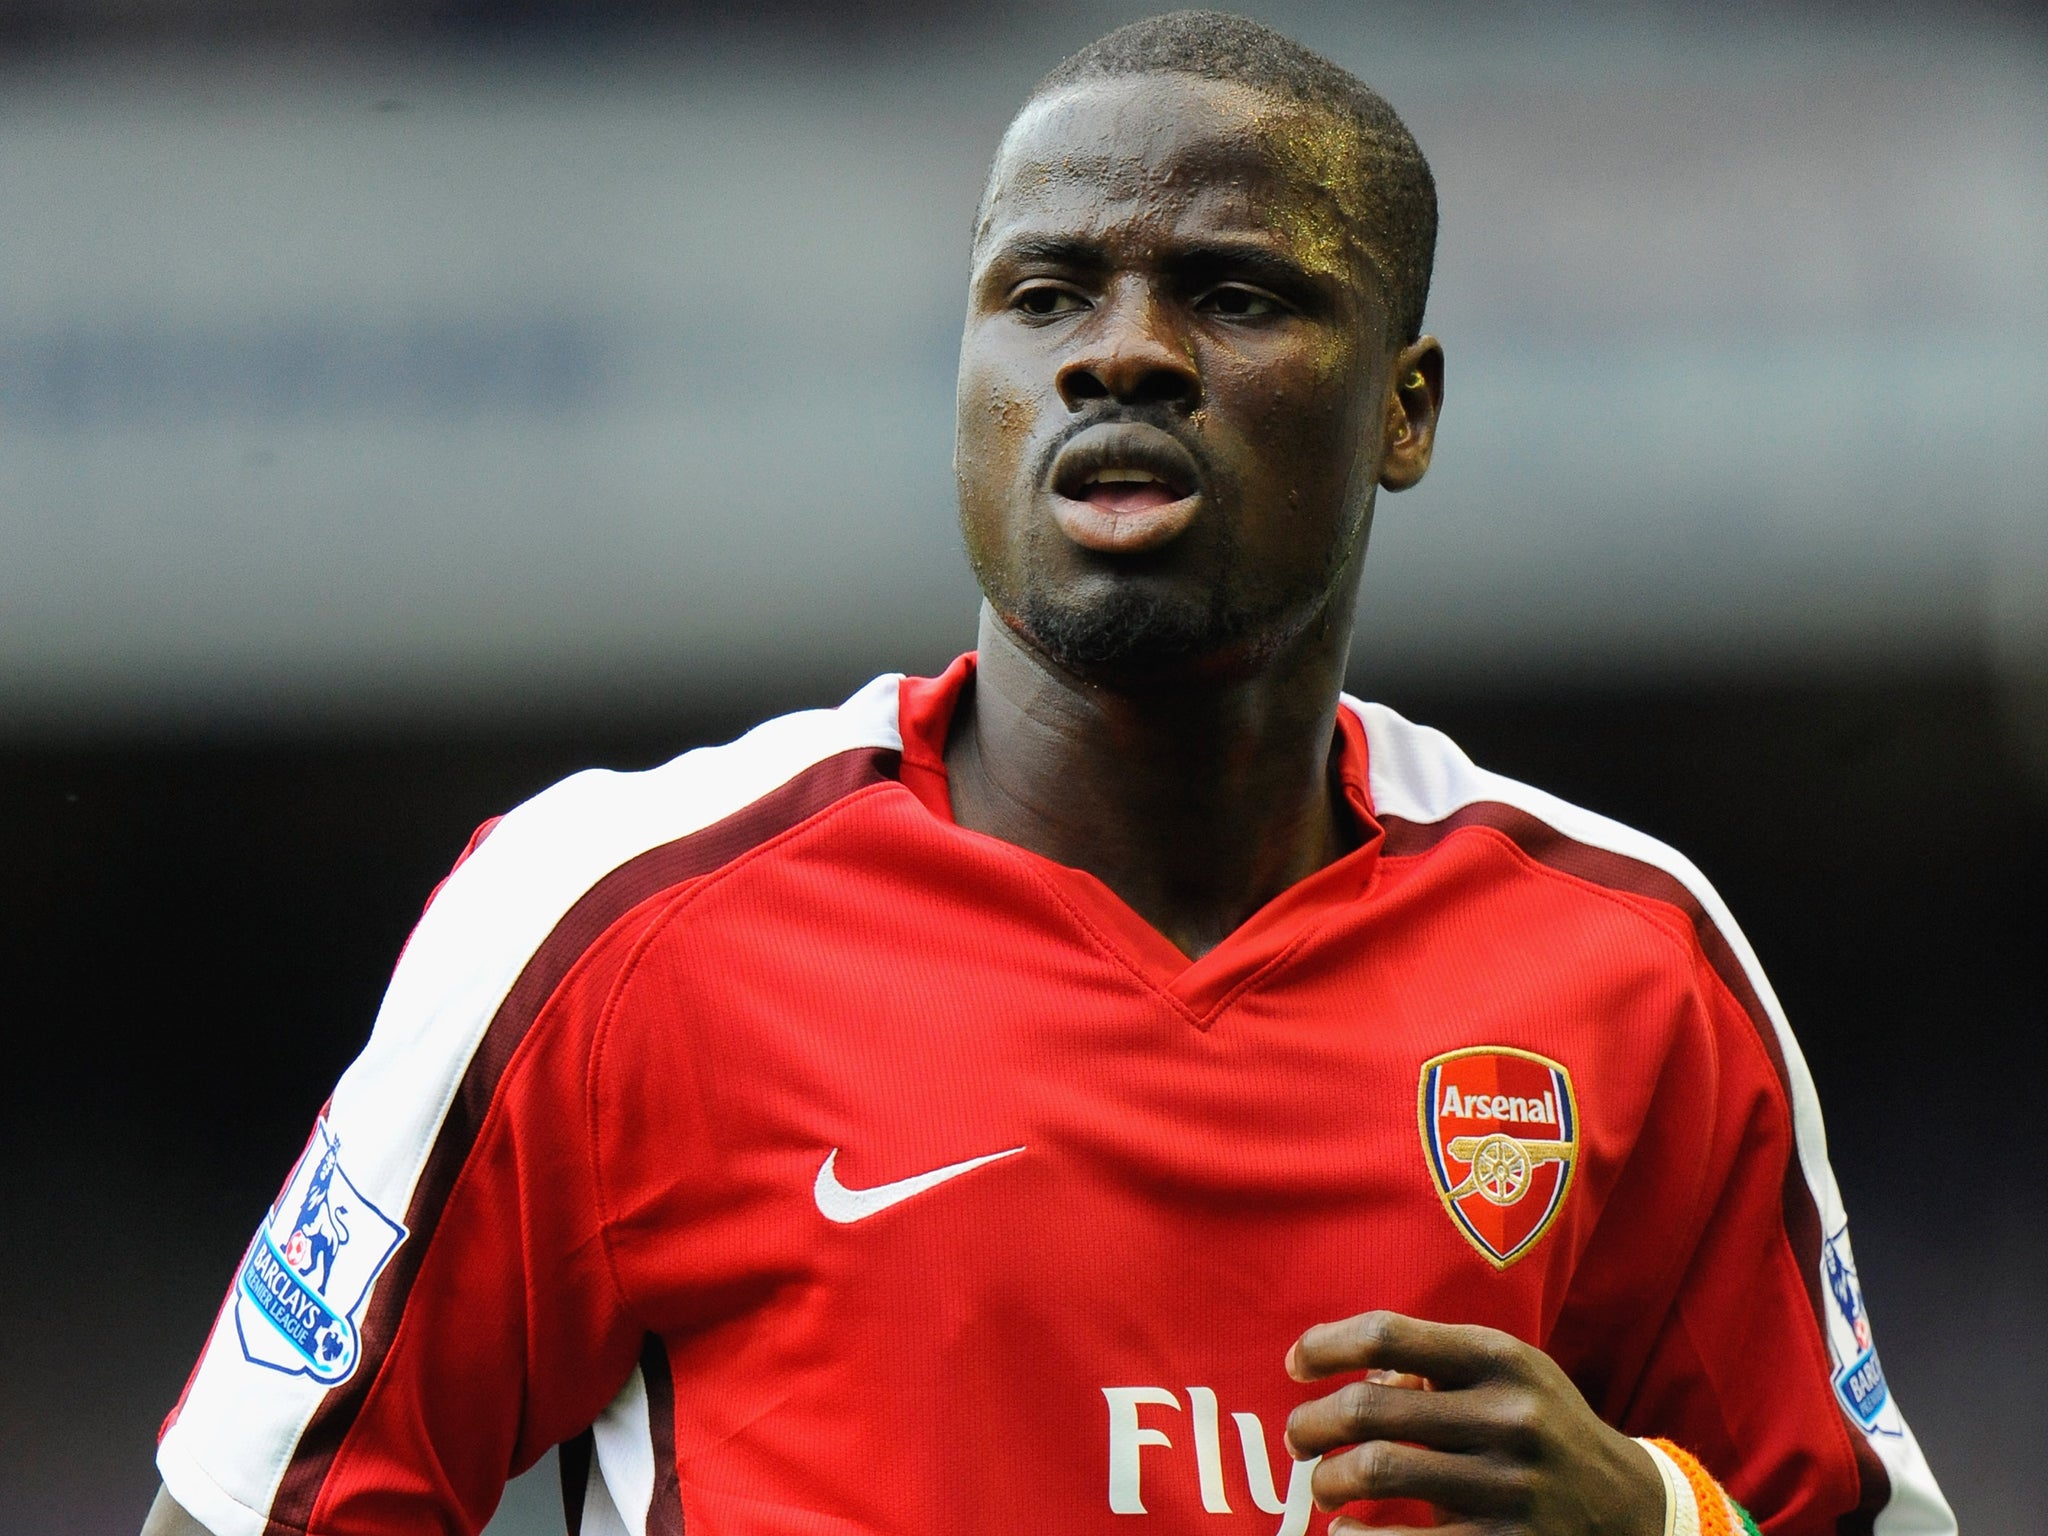 Emmanuel Eboue 'dodging bailiffs and sleeping on the floor' as former Arsenal stars admits he's contemplated suicide